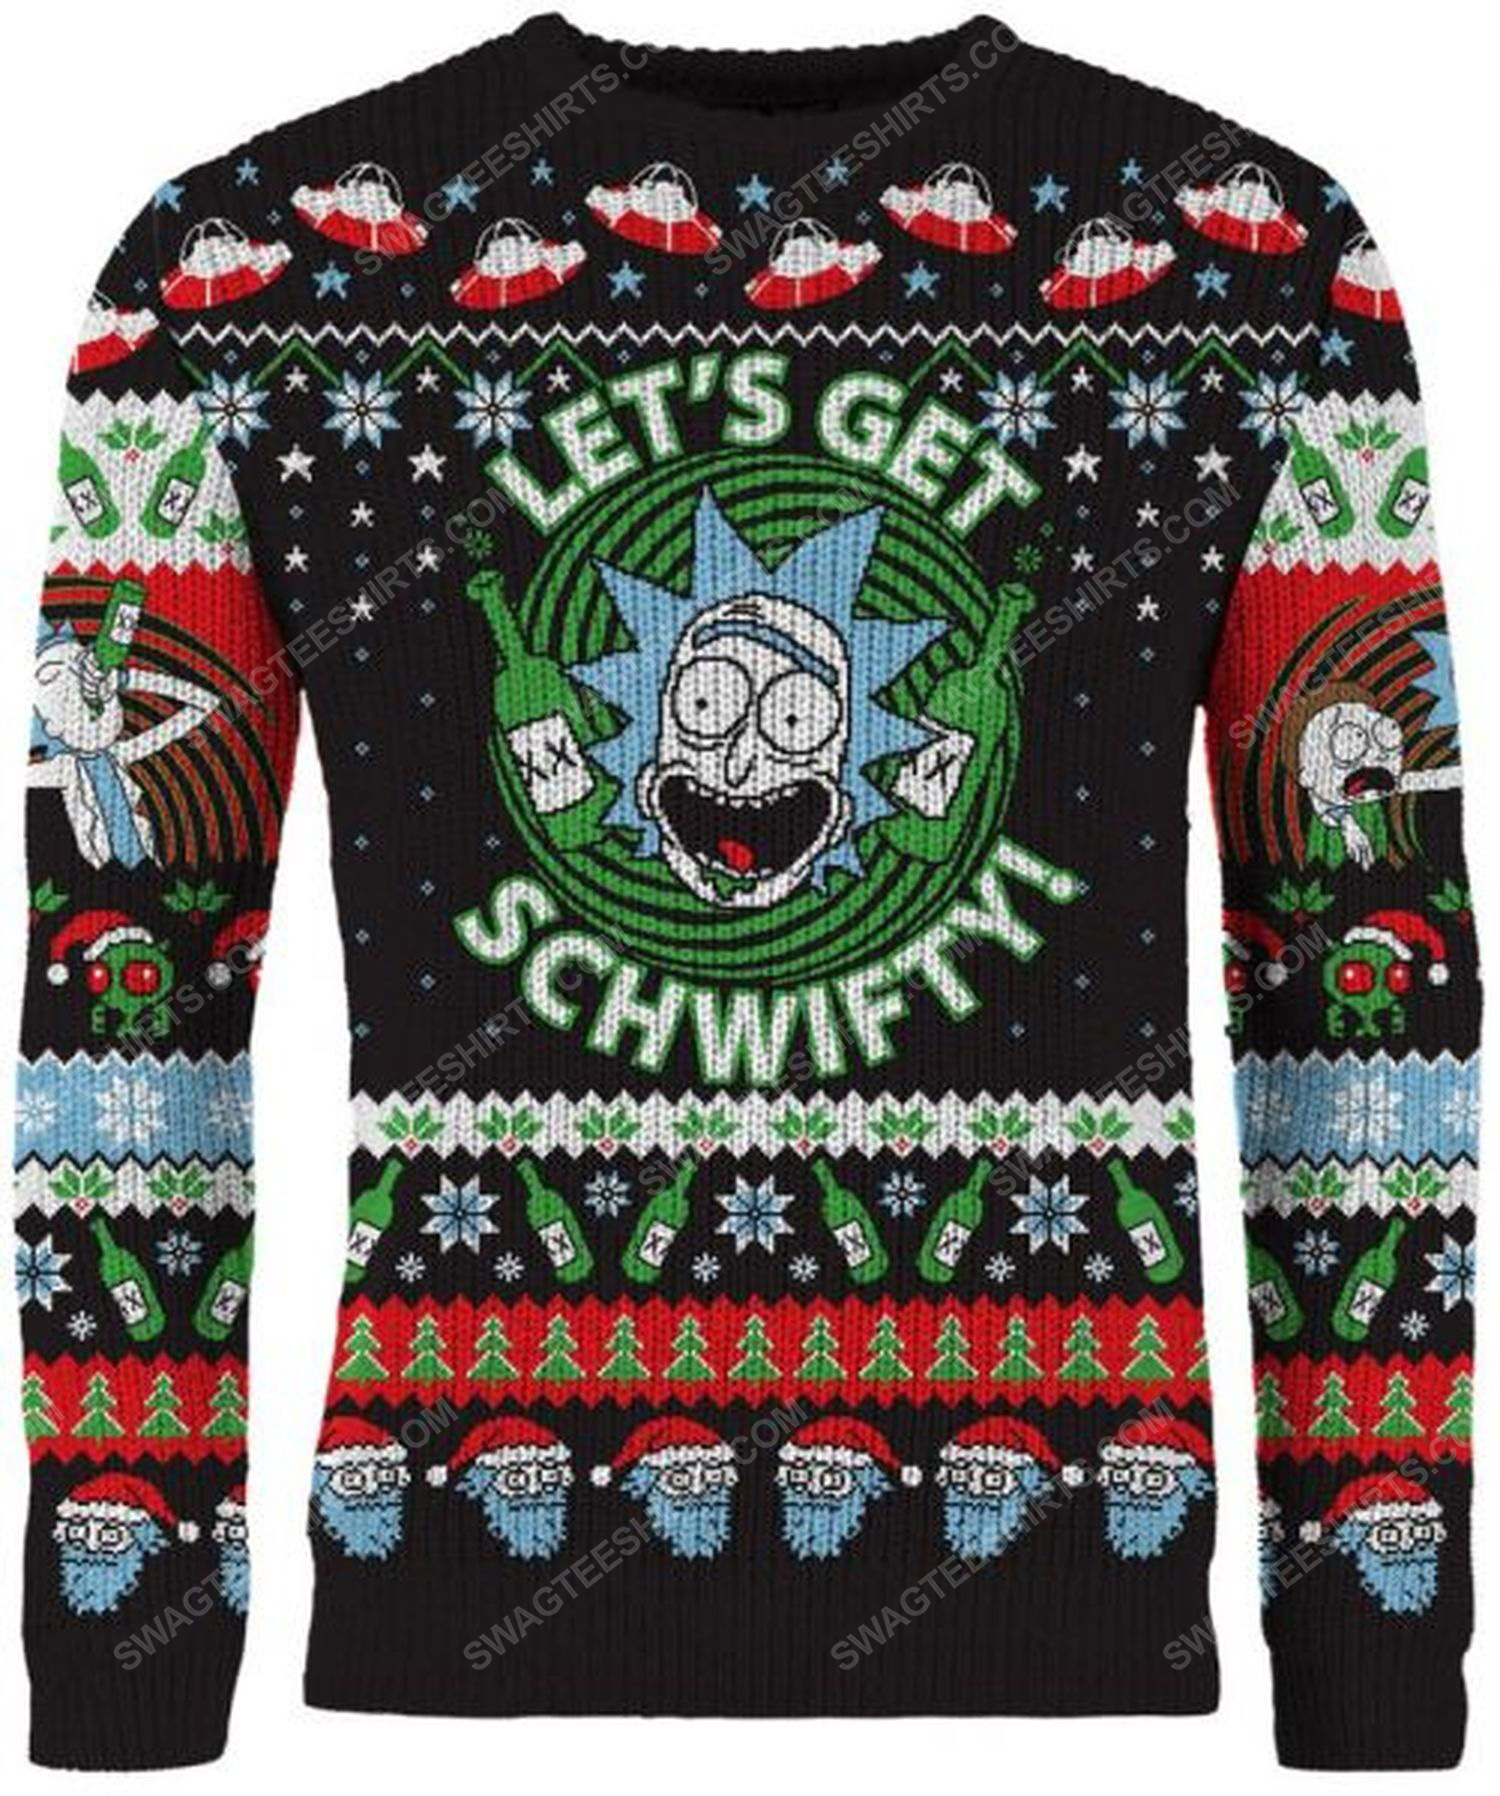 [special edition] Rick and morty let’s get schwifty full print ugly christmas sweater – maria